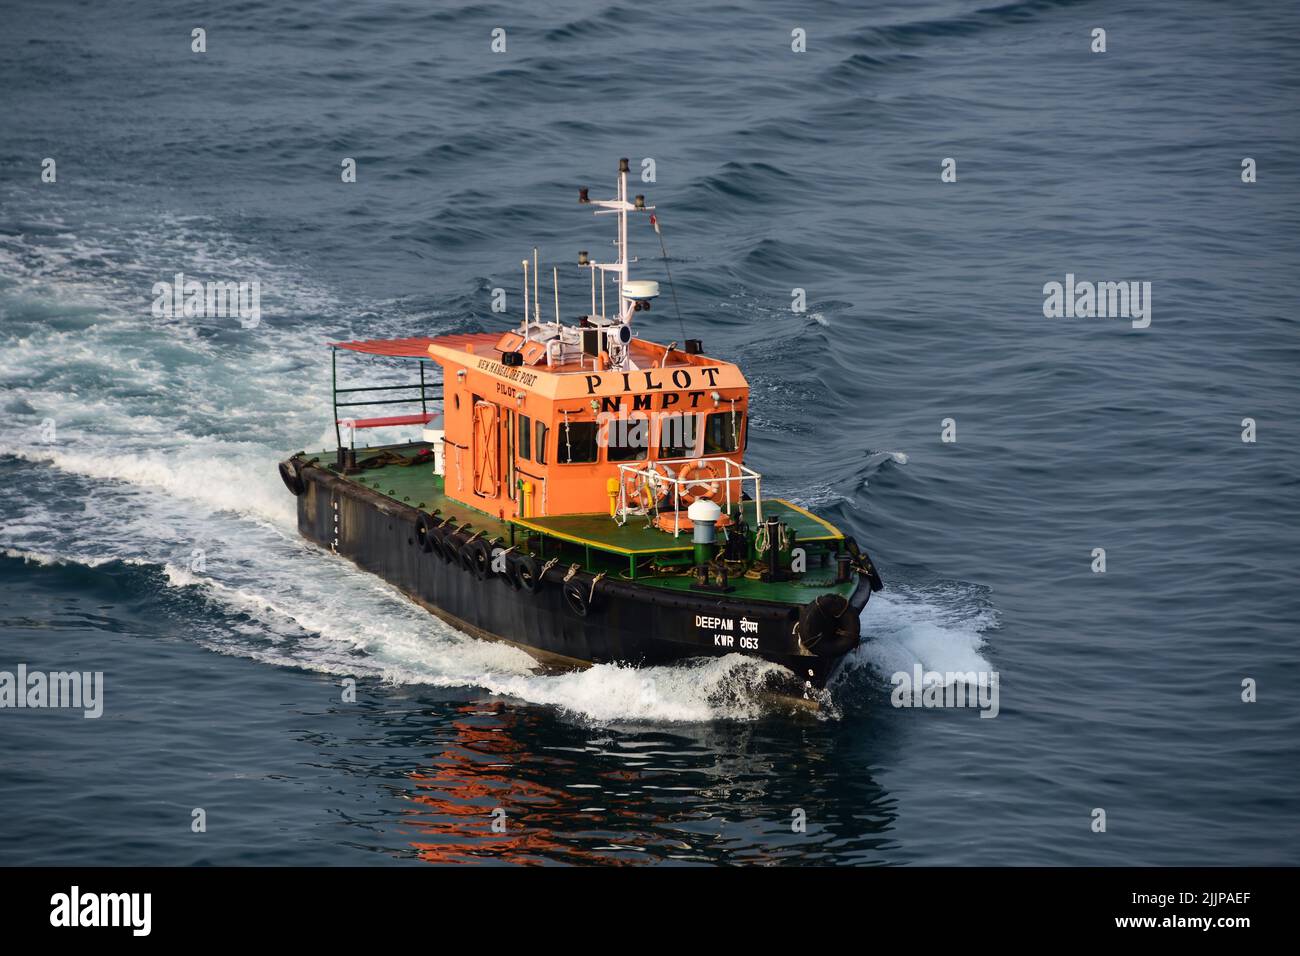 Picture shows a pilot boat at sea in New Mangalore, India Stock Photo